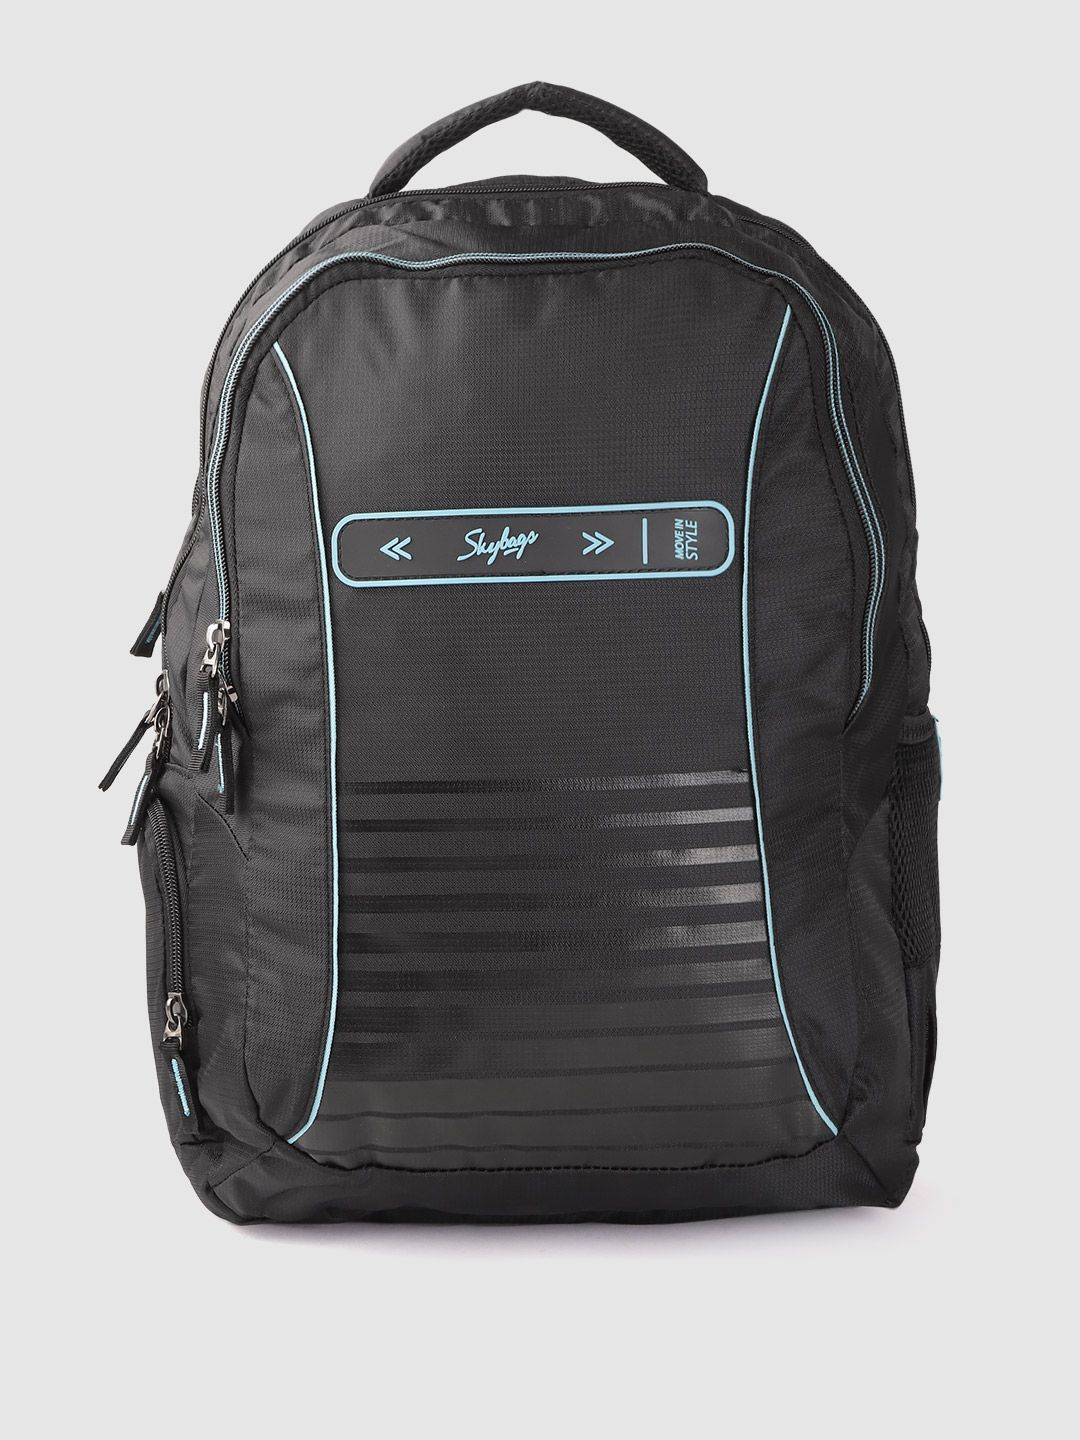 Skybags Unisex Black Brand Logo Textured Backpack Price in India